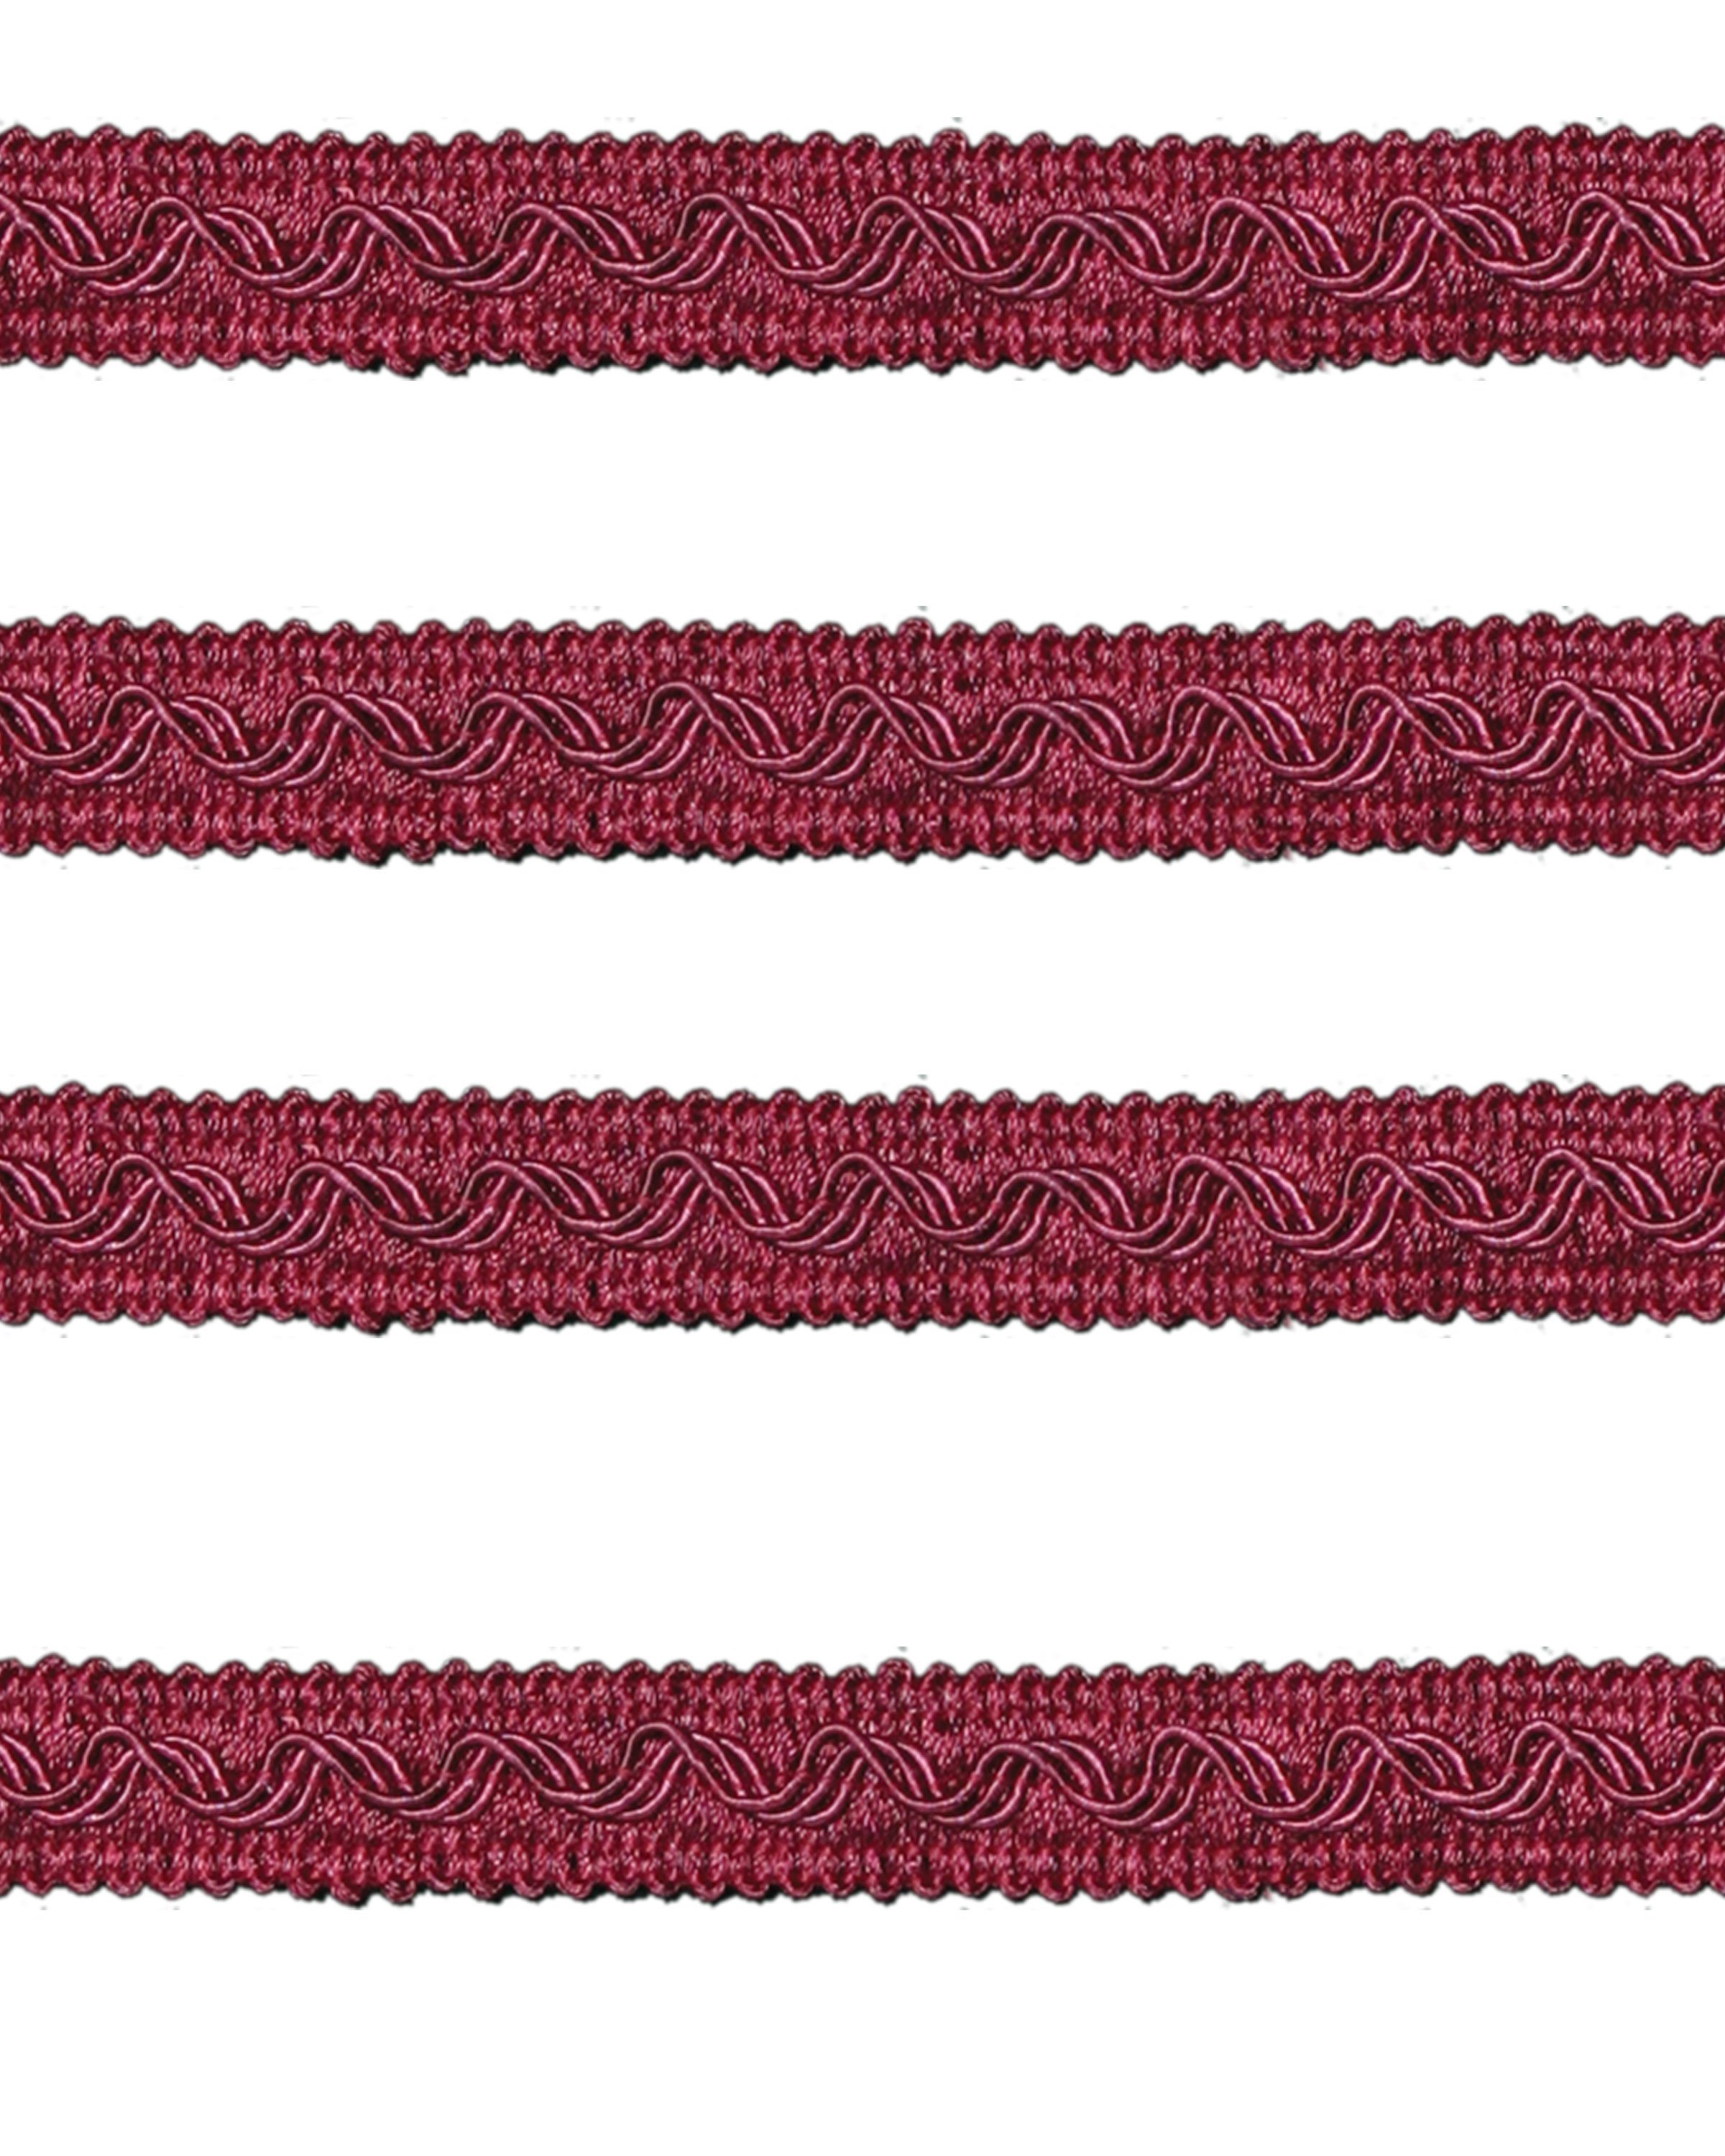 Small Fancy Braid - Red Wine 17mm Price is for 5 metres